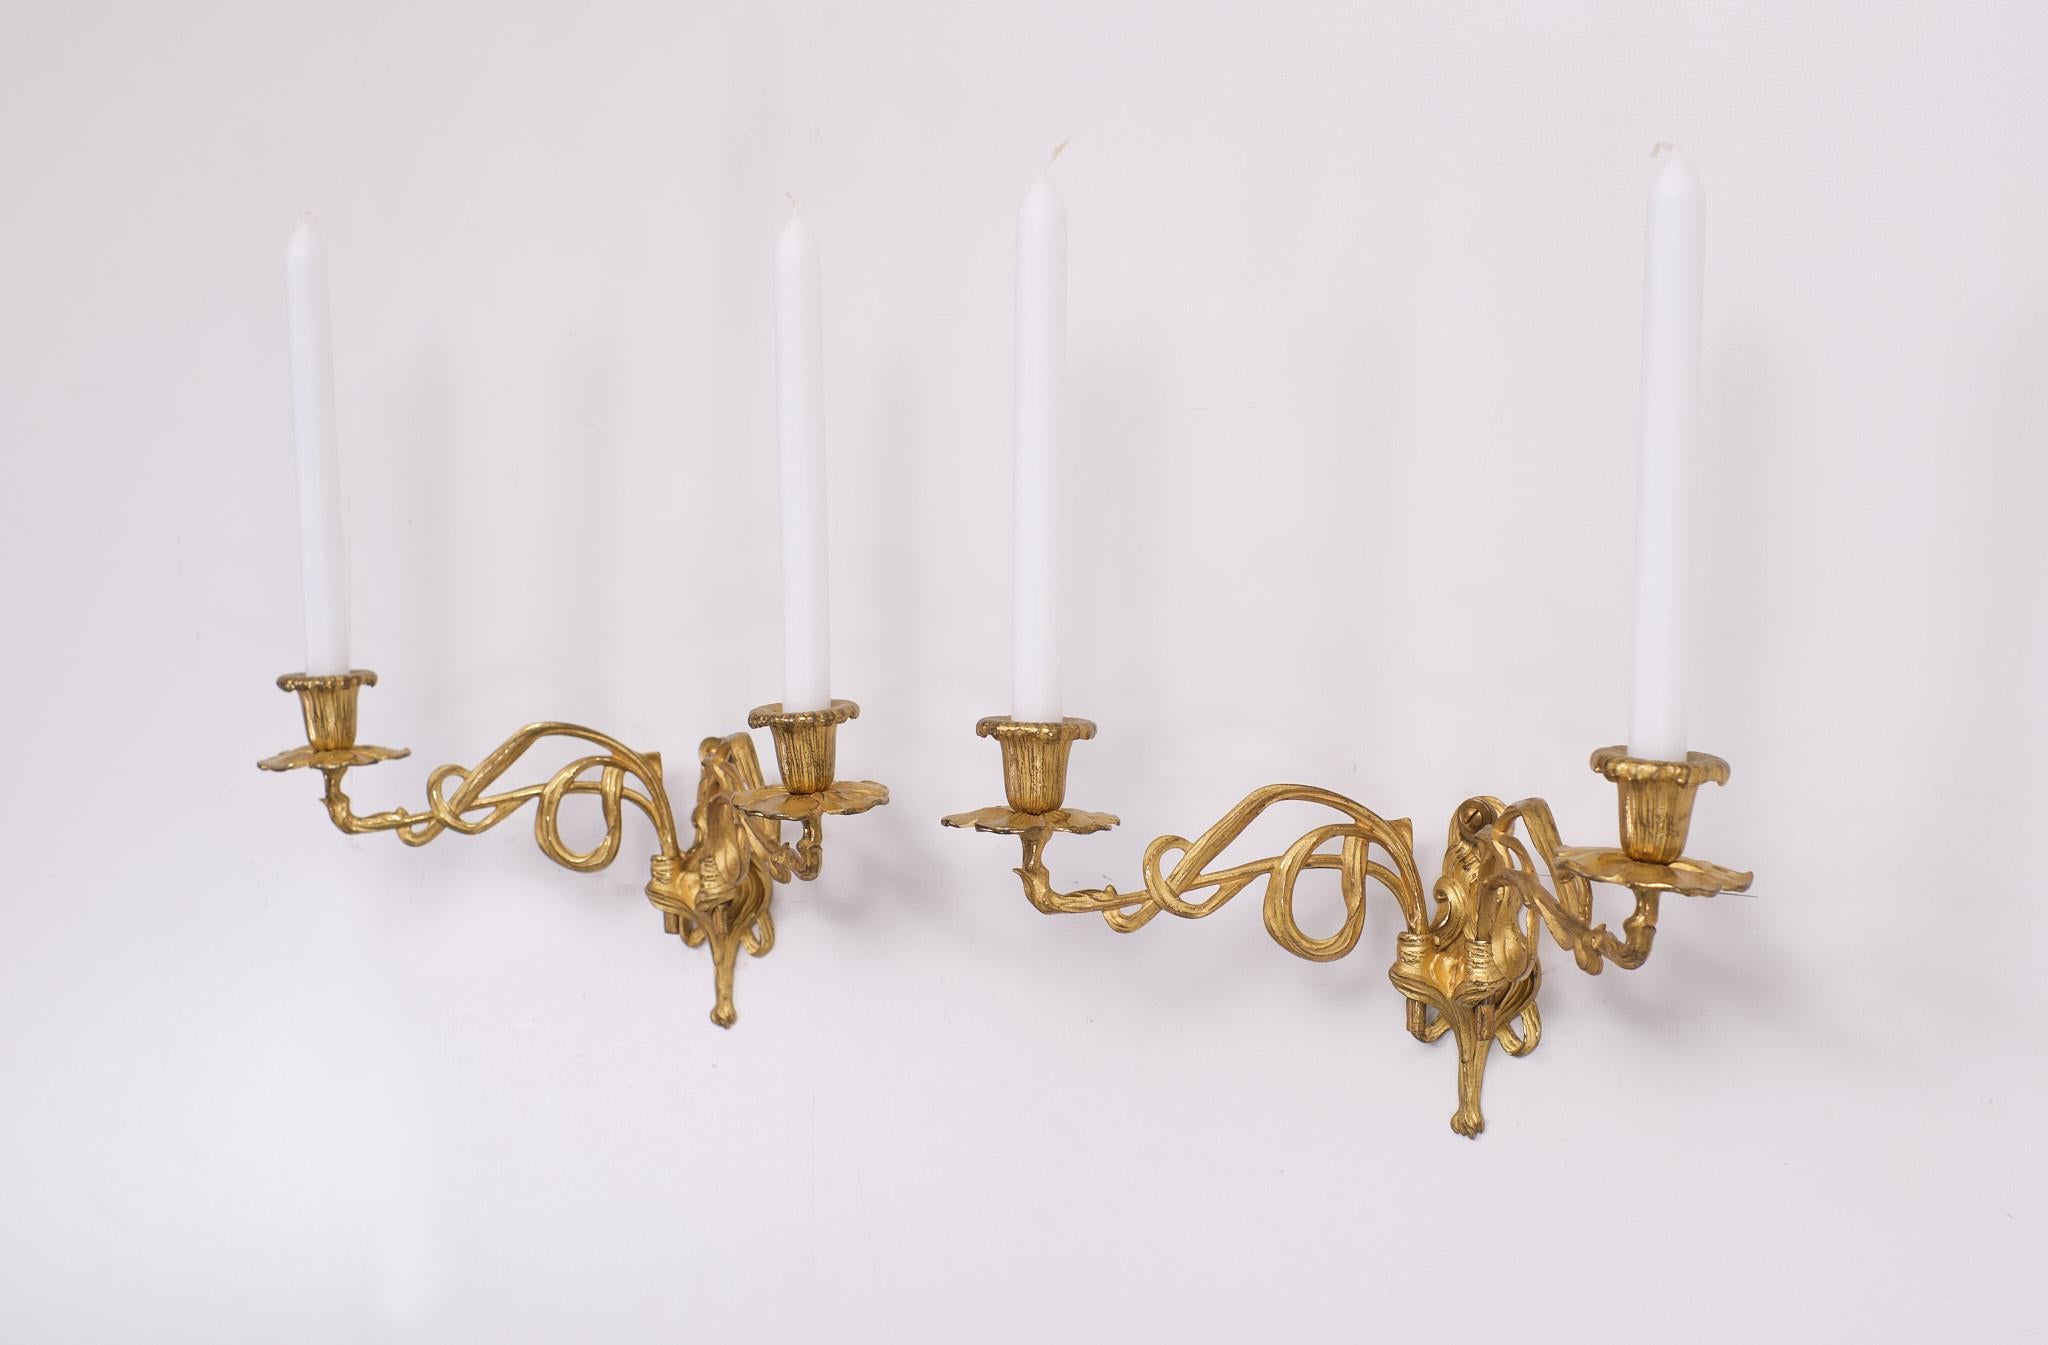 Superb Art Nouveau set of gilded bronze candle sconces. Beautiful color.
every piece is Signed by the maker E Muller Paris 1920s Very nice quality.
Two candles each. Very good condition.